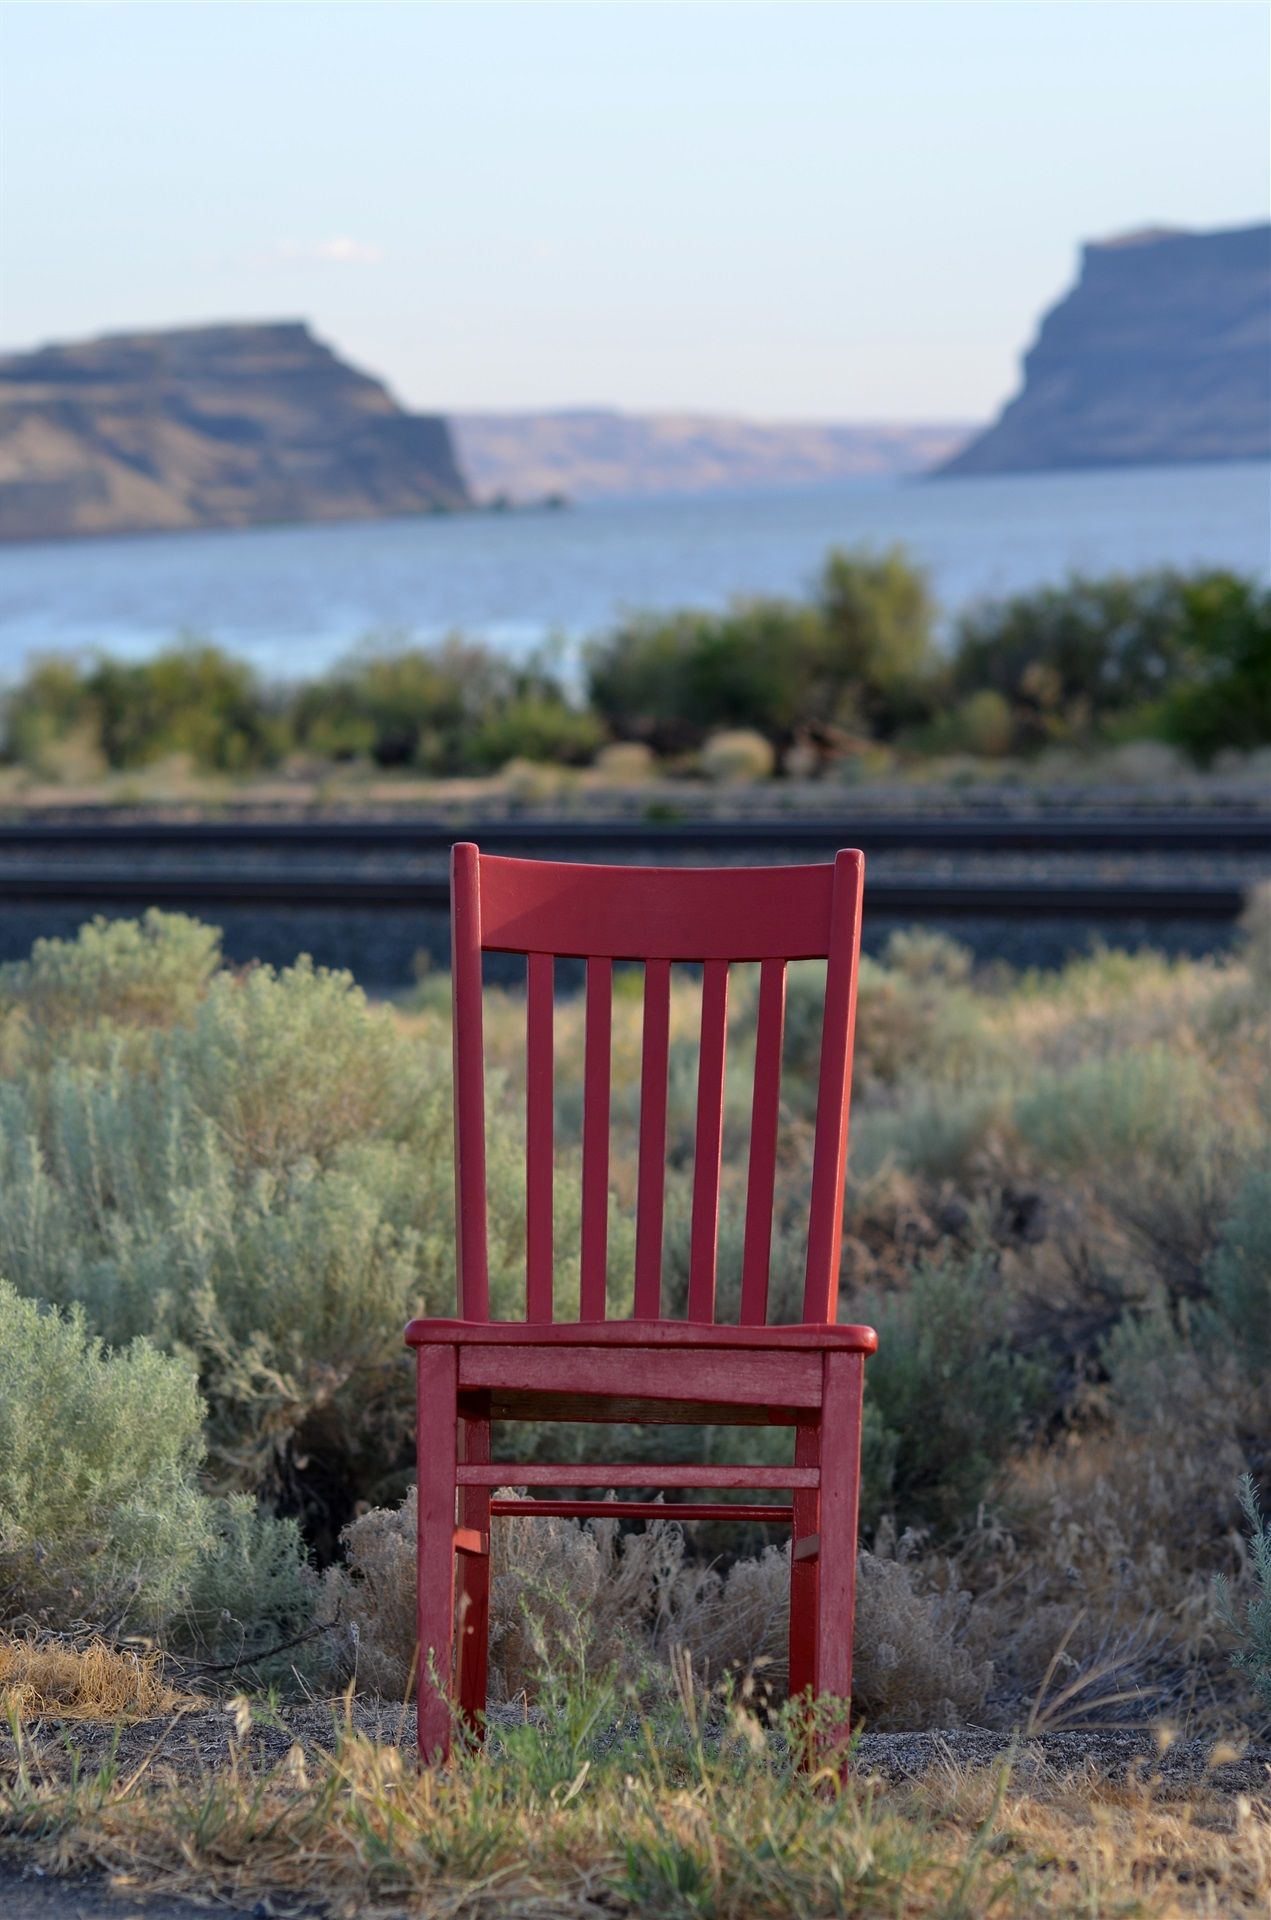 Red chair sitting amongst some brush with the bay and cliffsides in the background